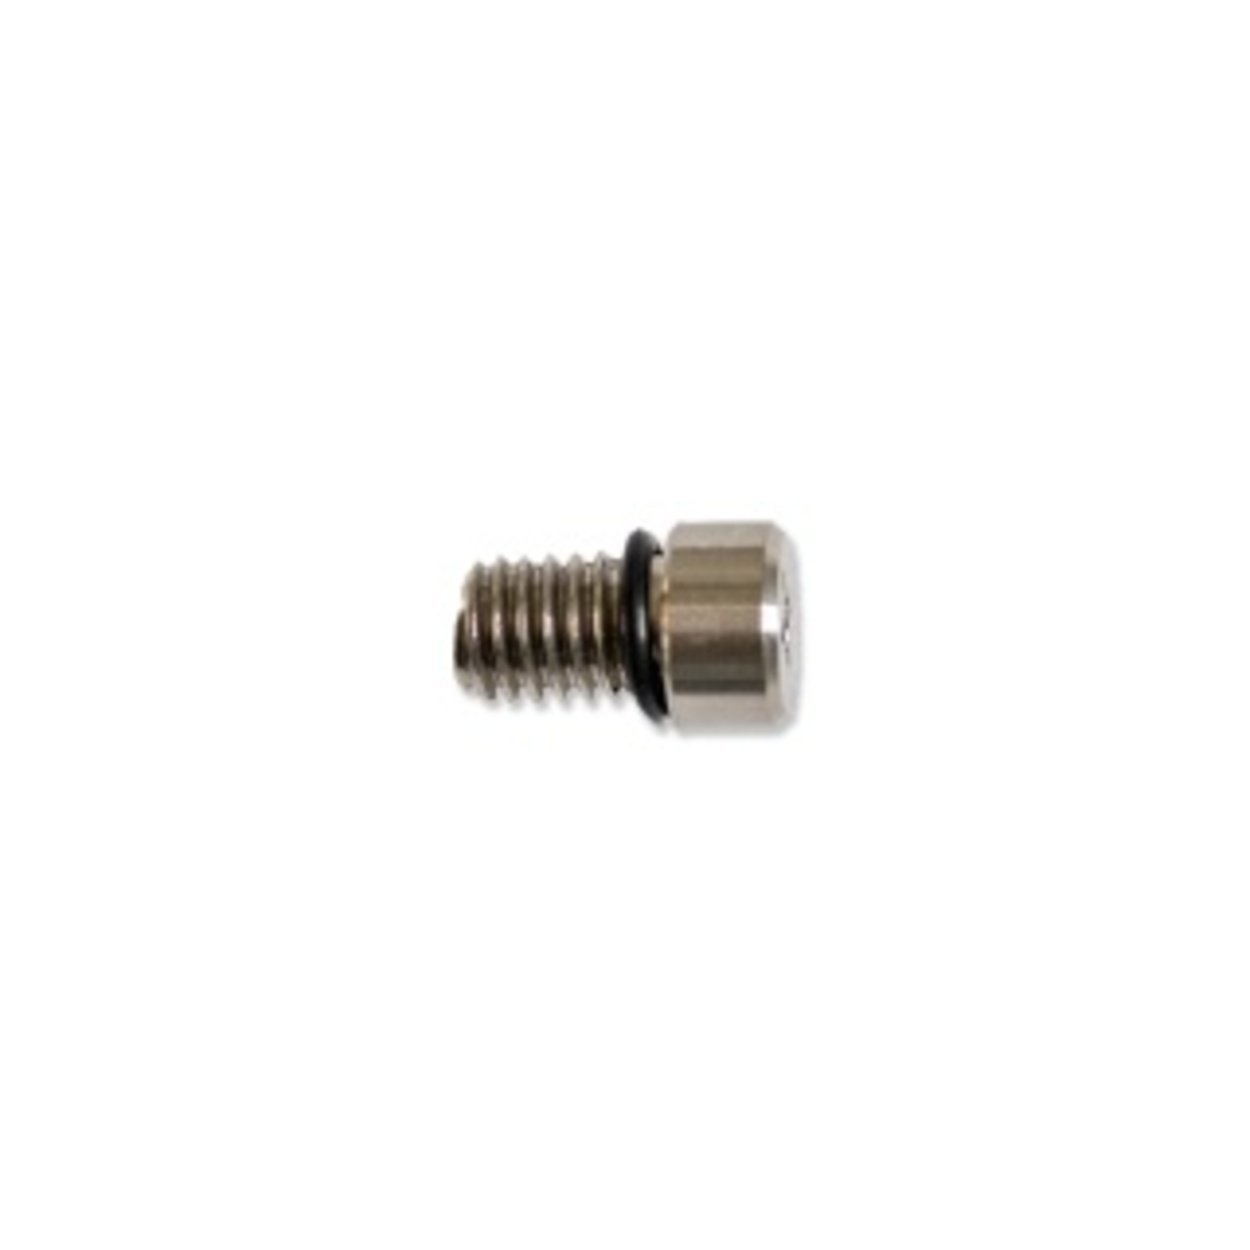 Duotone Airvalve Screw f. Composite Boards (DTW/FA) 2024 - Worthing Watersports - 9010583199504 - Spareparts - Duotone Windsurfing